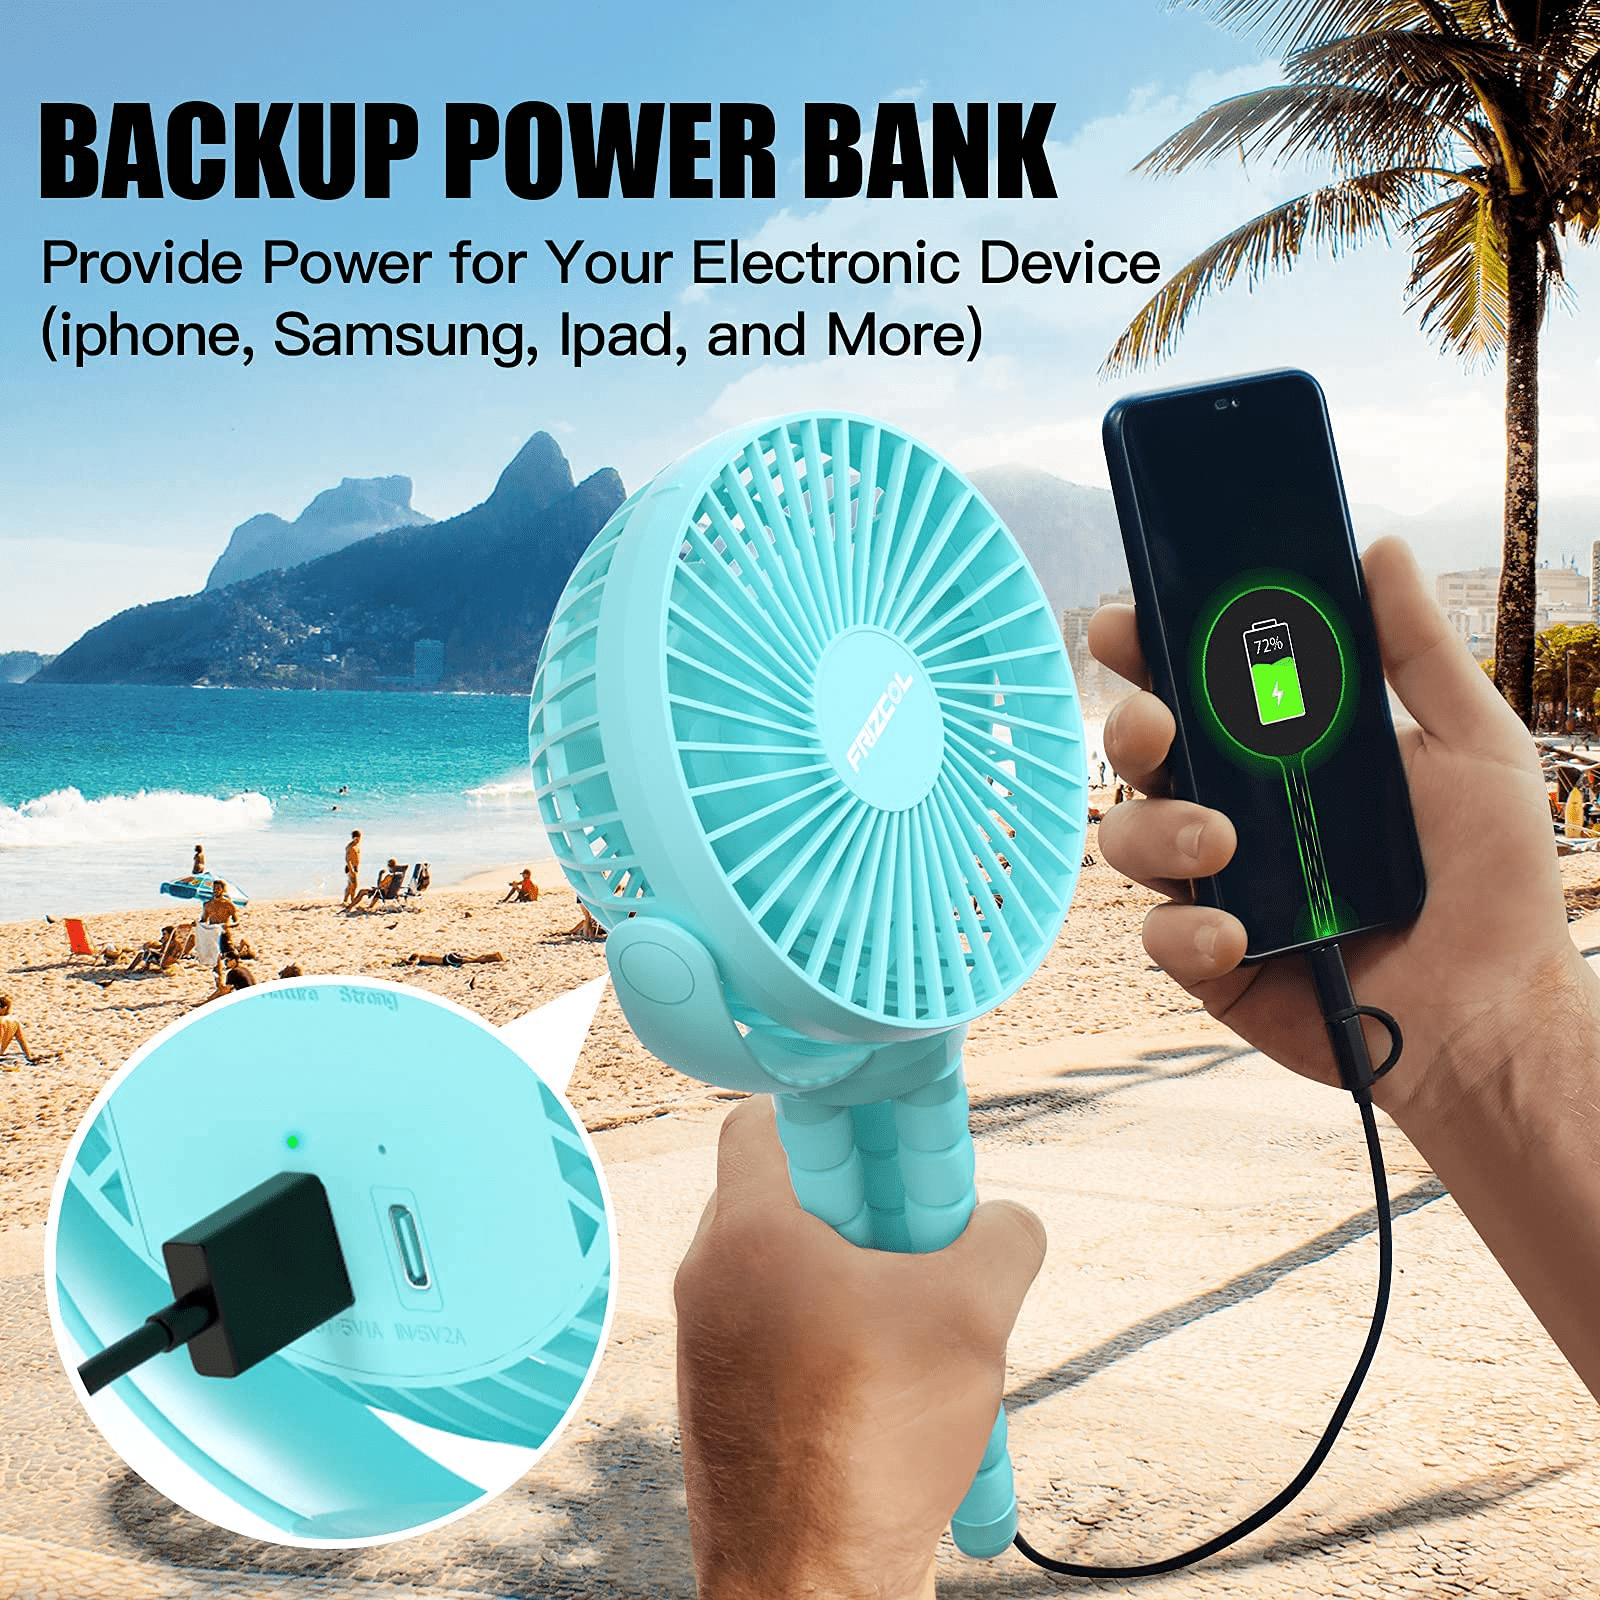 Rechargeable USB Fan Bed 12000 Capacity Battery Operated Fan with Tripod Legs Small Fan with LED Lights Peloton Fan for Treadmill Tent Travel Camping Portable Stroller Fan 60 Working Hours 